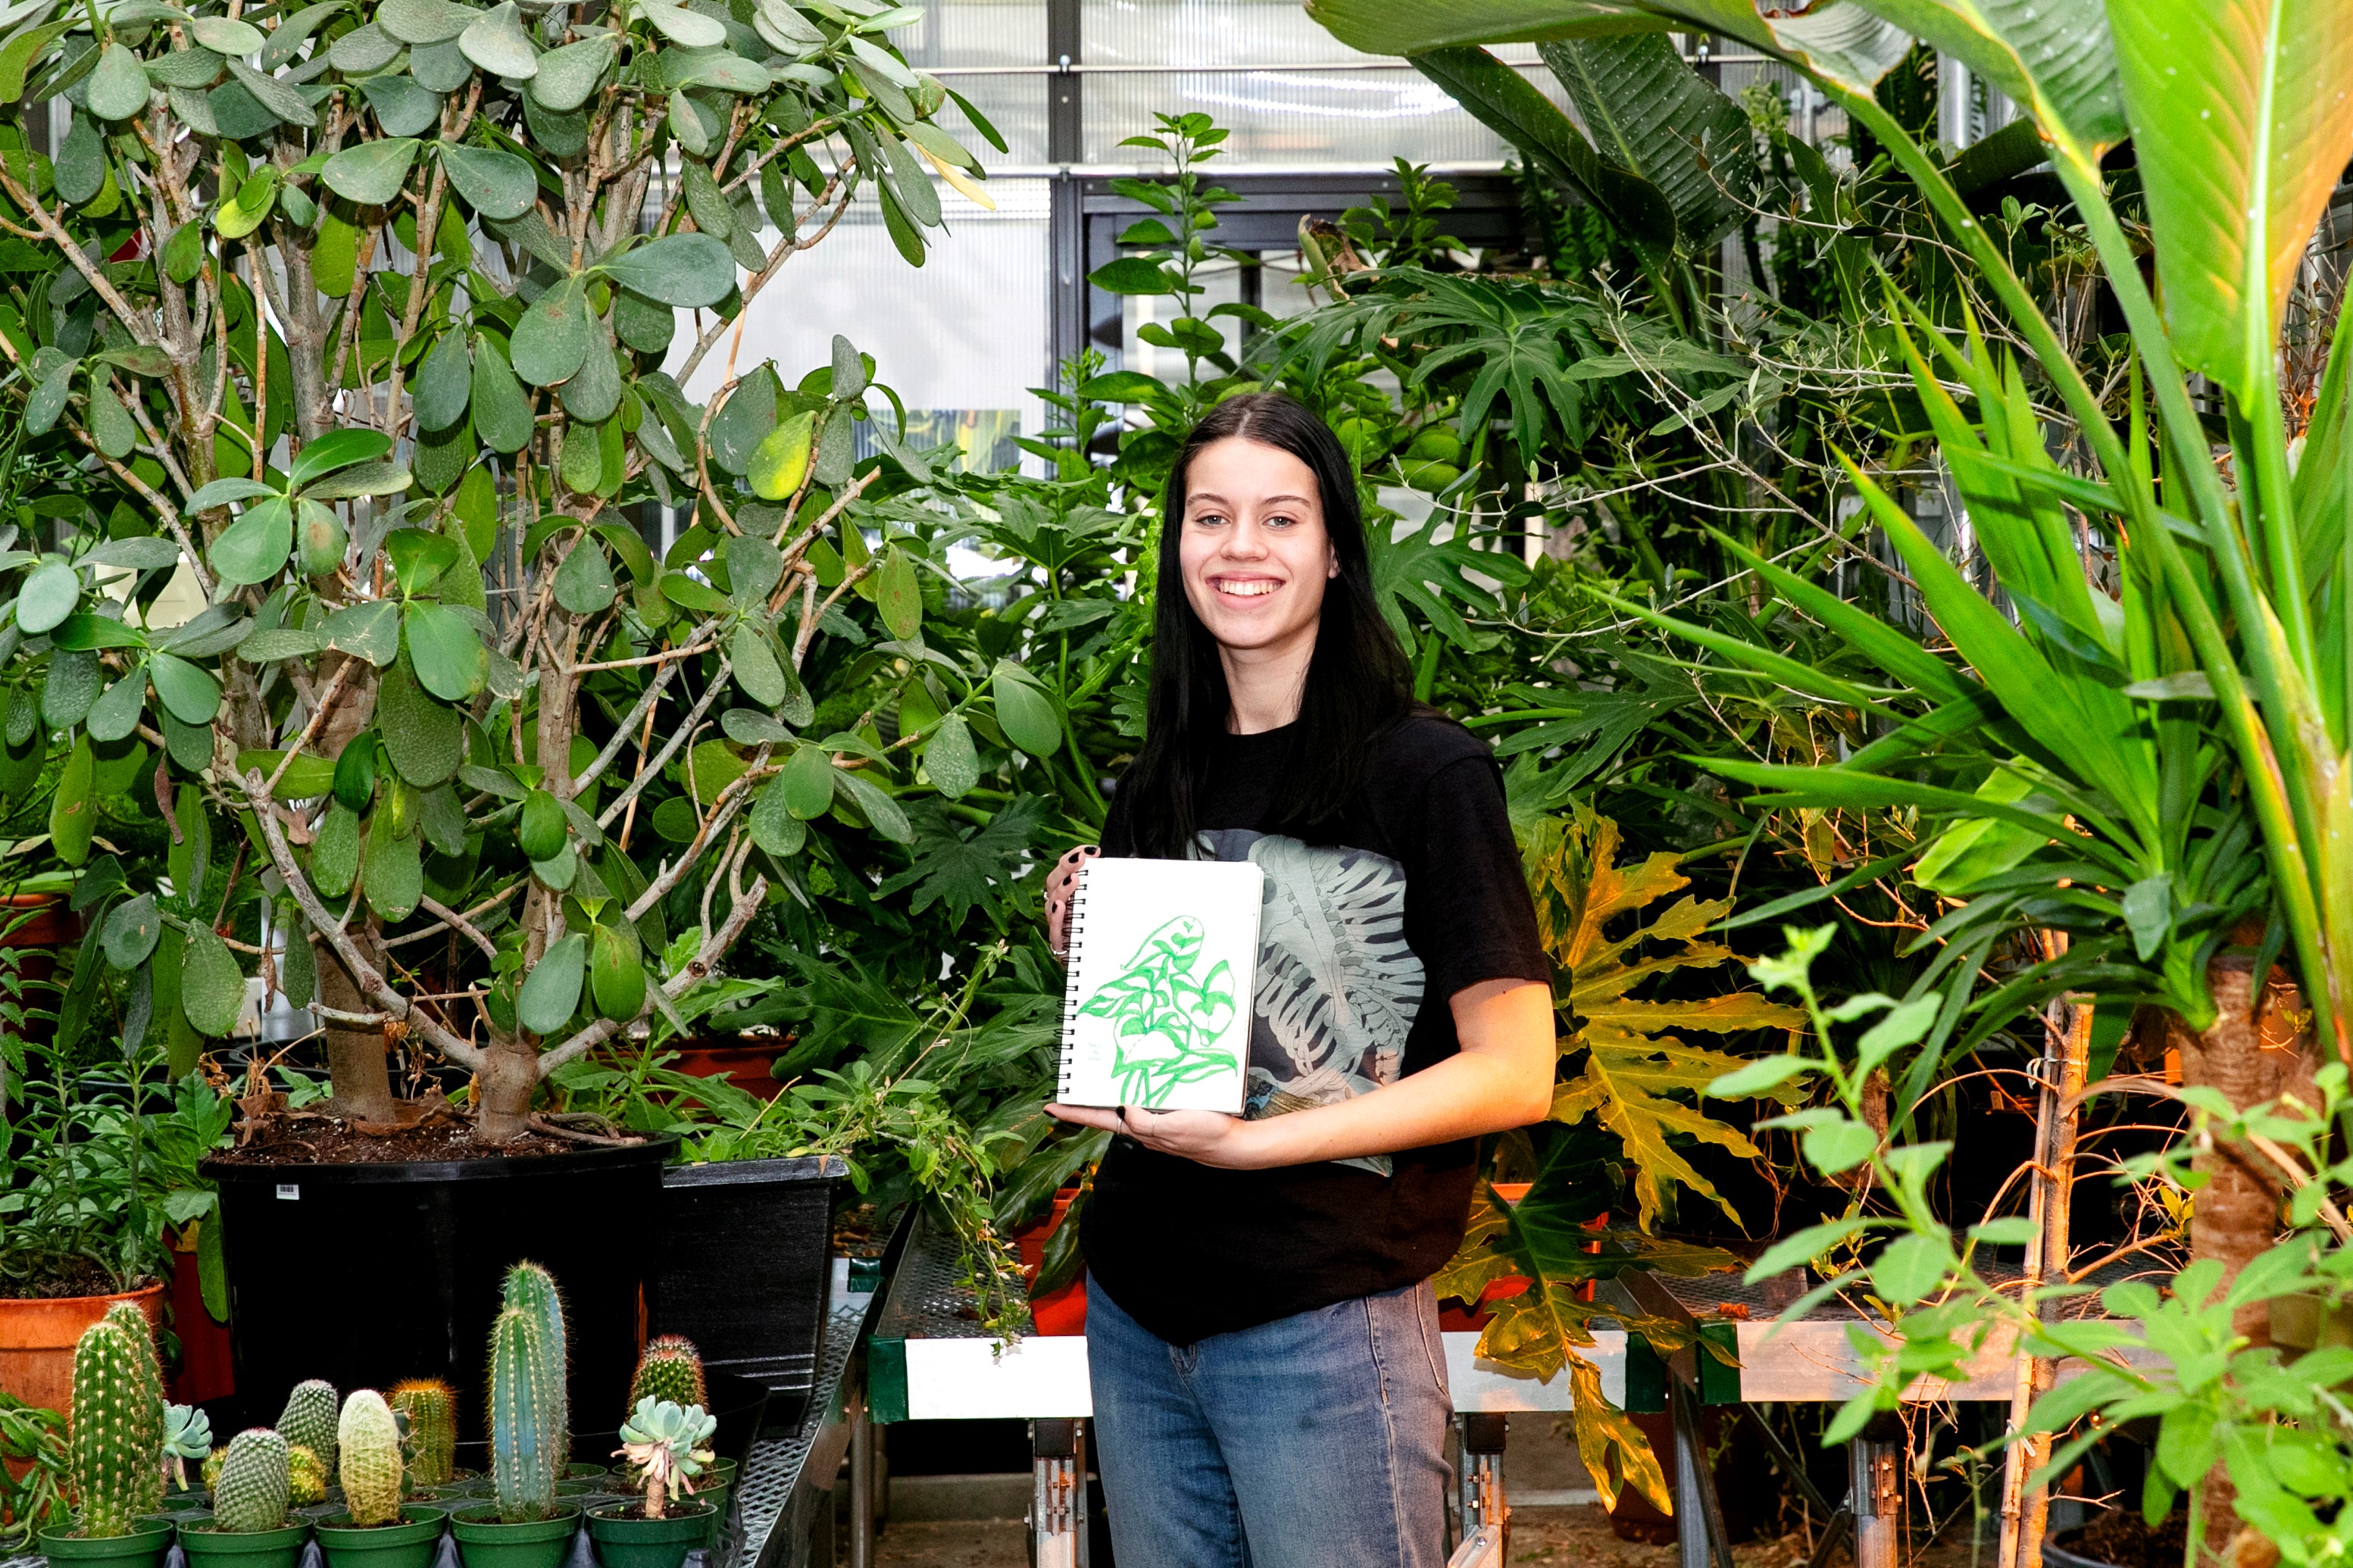 Biology and studio art double major Allison Conwell 鈥�25, who plans to pursue a career in scientific illustration, shows one of her illustrations during a visit to the Billie Tisch Center for Integrated Sciences greenhouse.